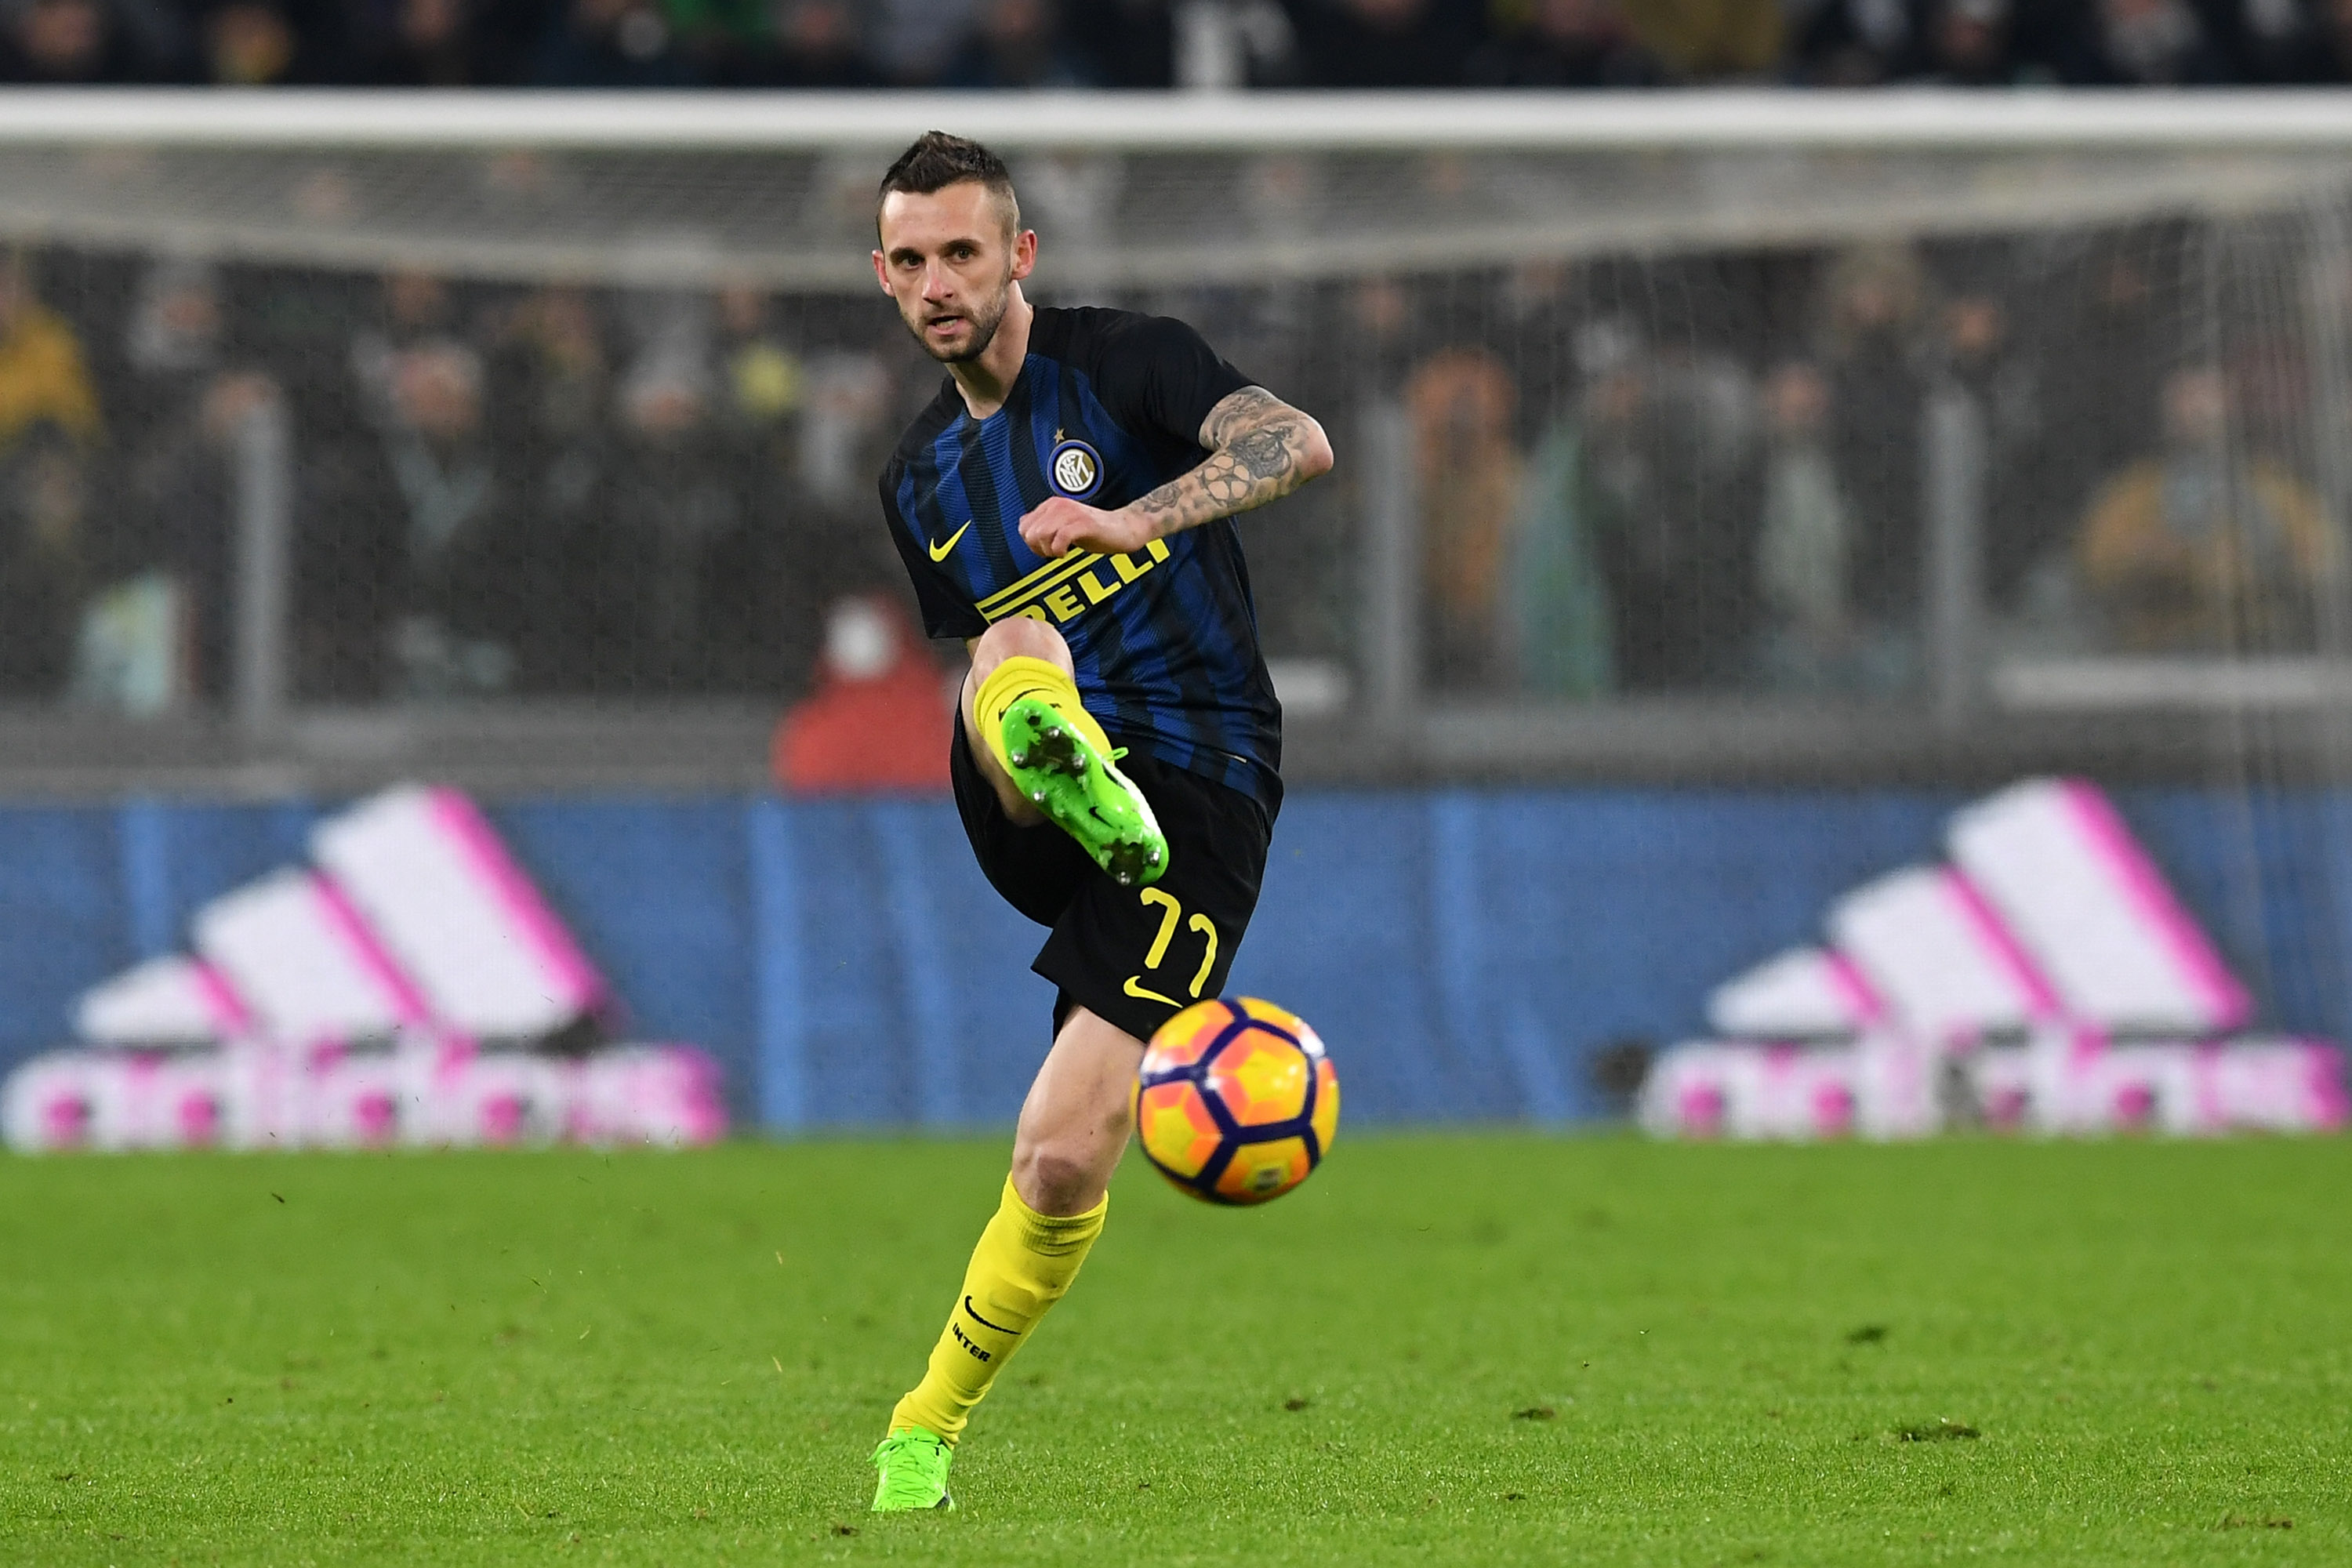 TURIN, ITALY - FEBRUARY 05: Marcelo Brozovic of FC Internazionale in action during the Serie A match between Juventus FC and FC Internazionale at Juventus Stadium on February 5, 2017 in Turin, Italy. (Photo by Valerio Pennicino/Getty Images)